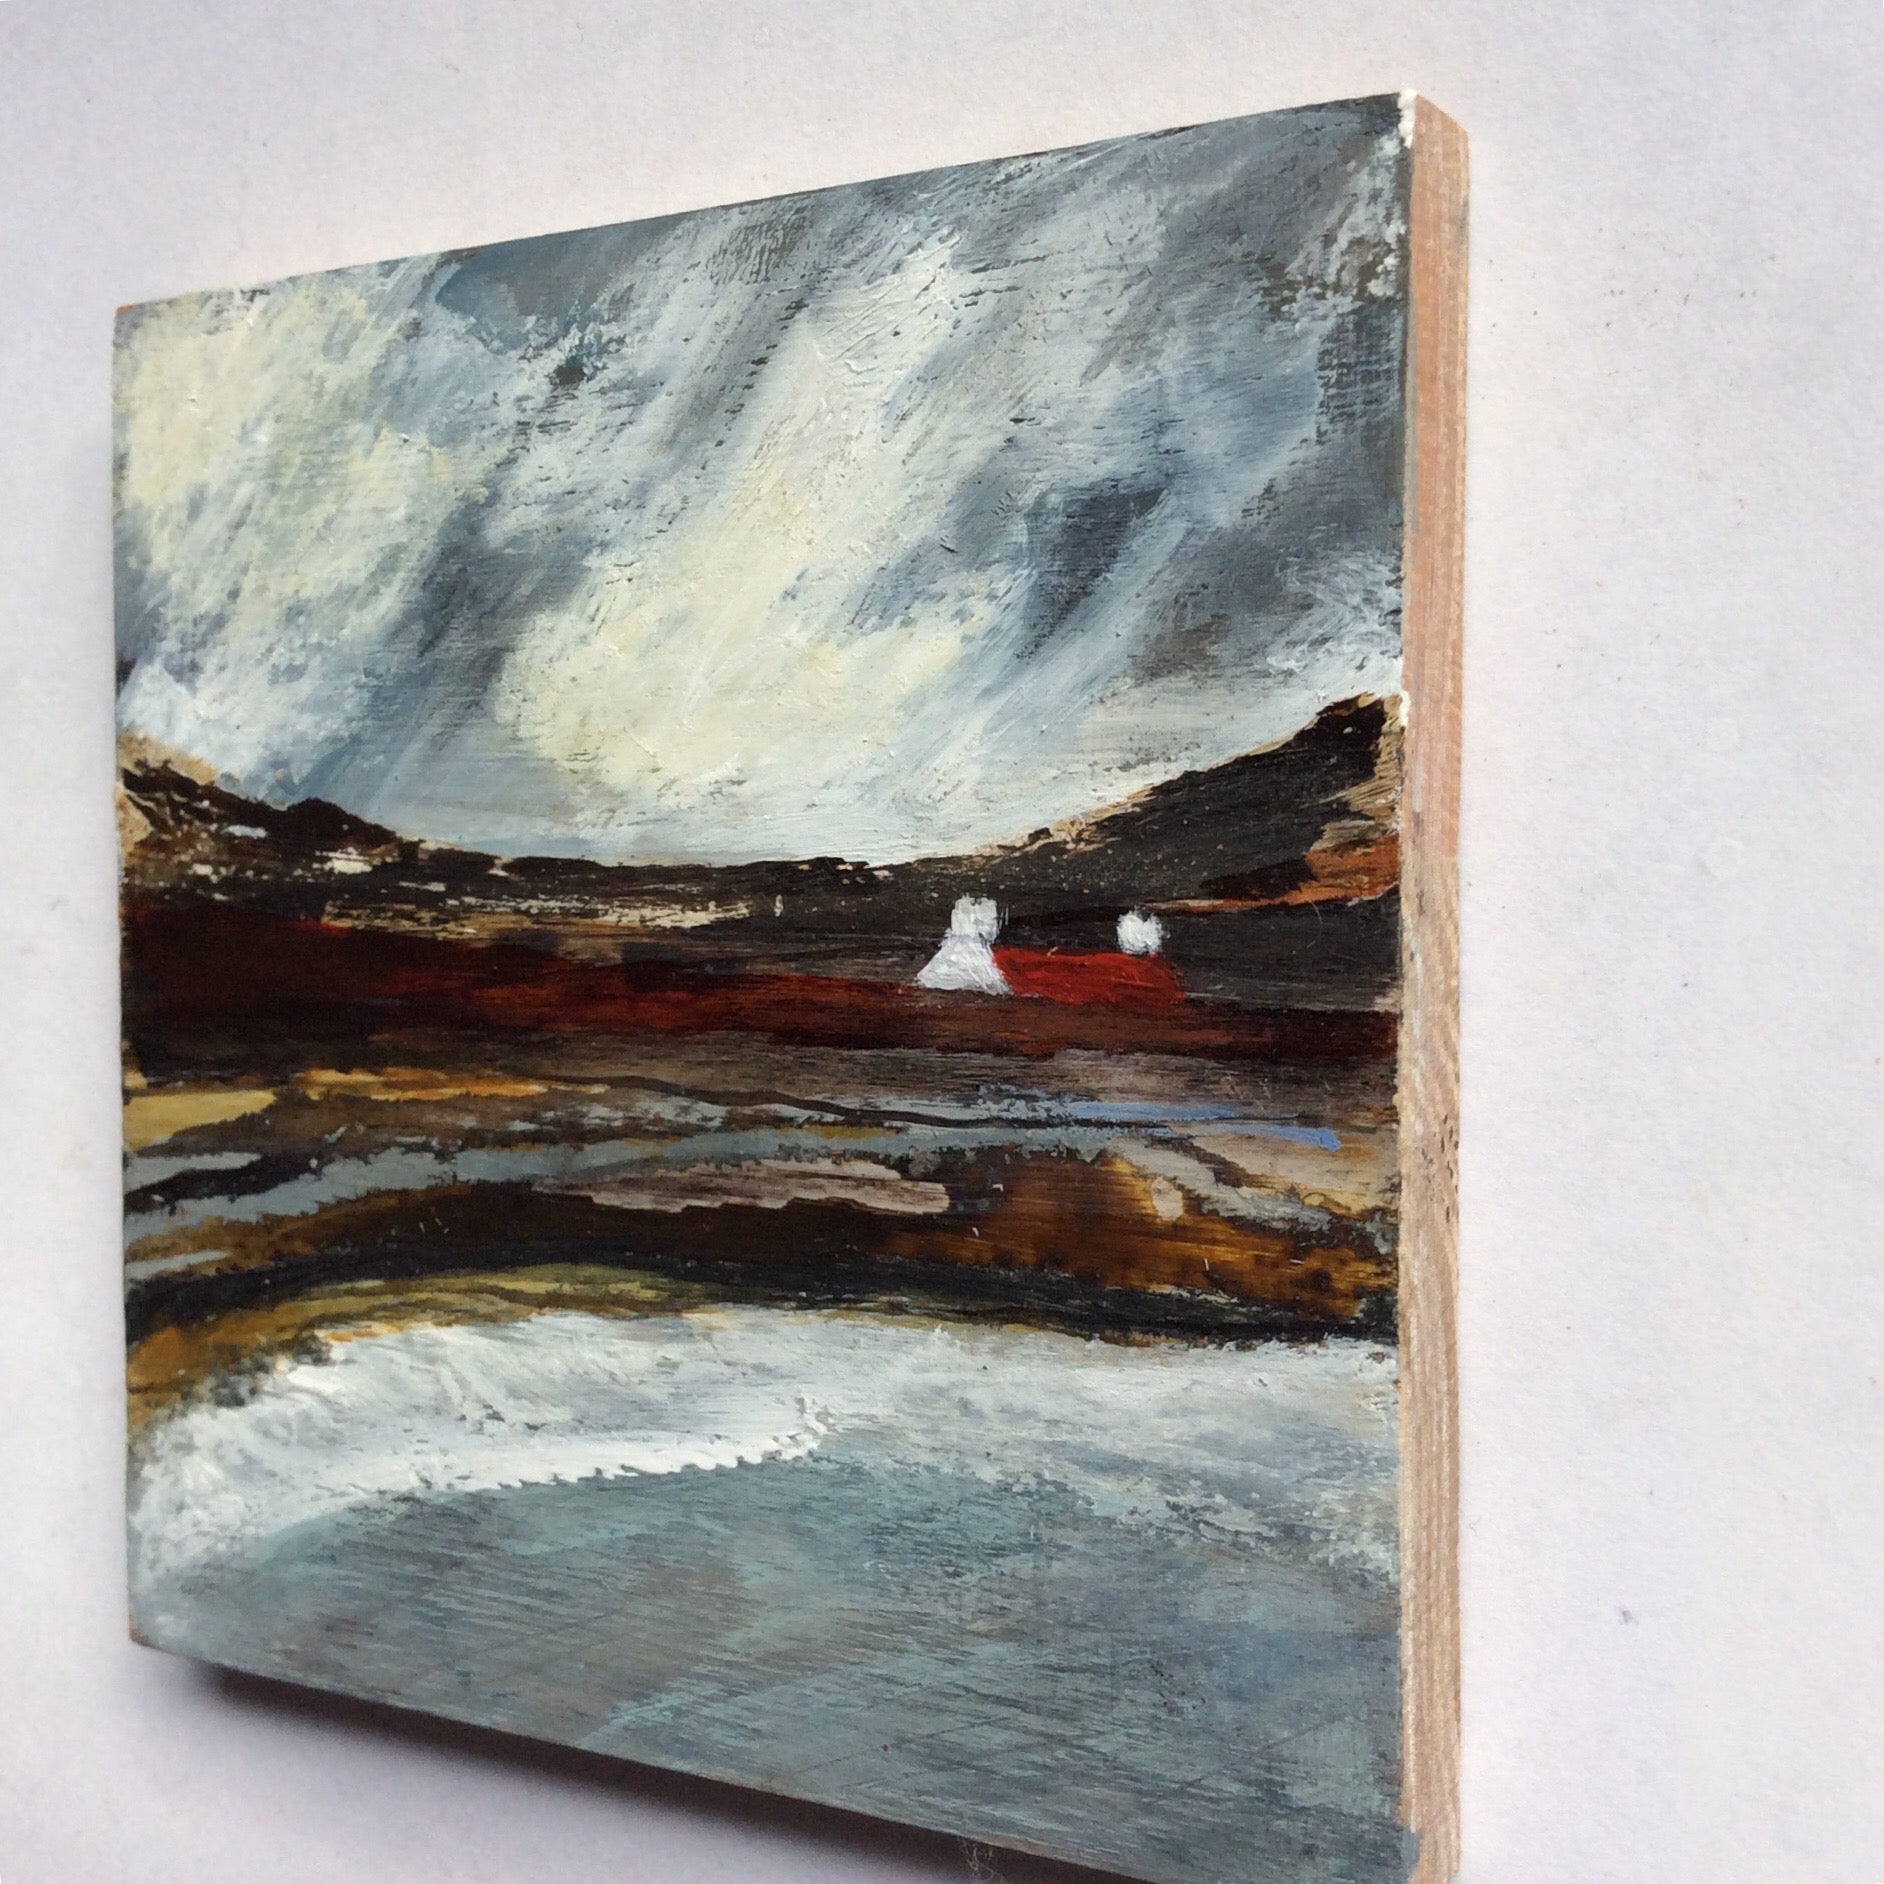 Mini Mixed Media Art on wood By Louise O'Hara - "A storm at high tide”